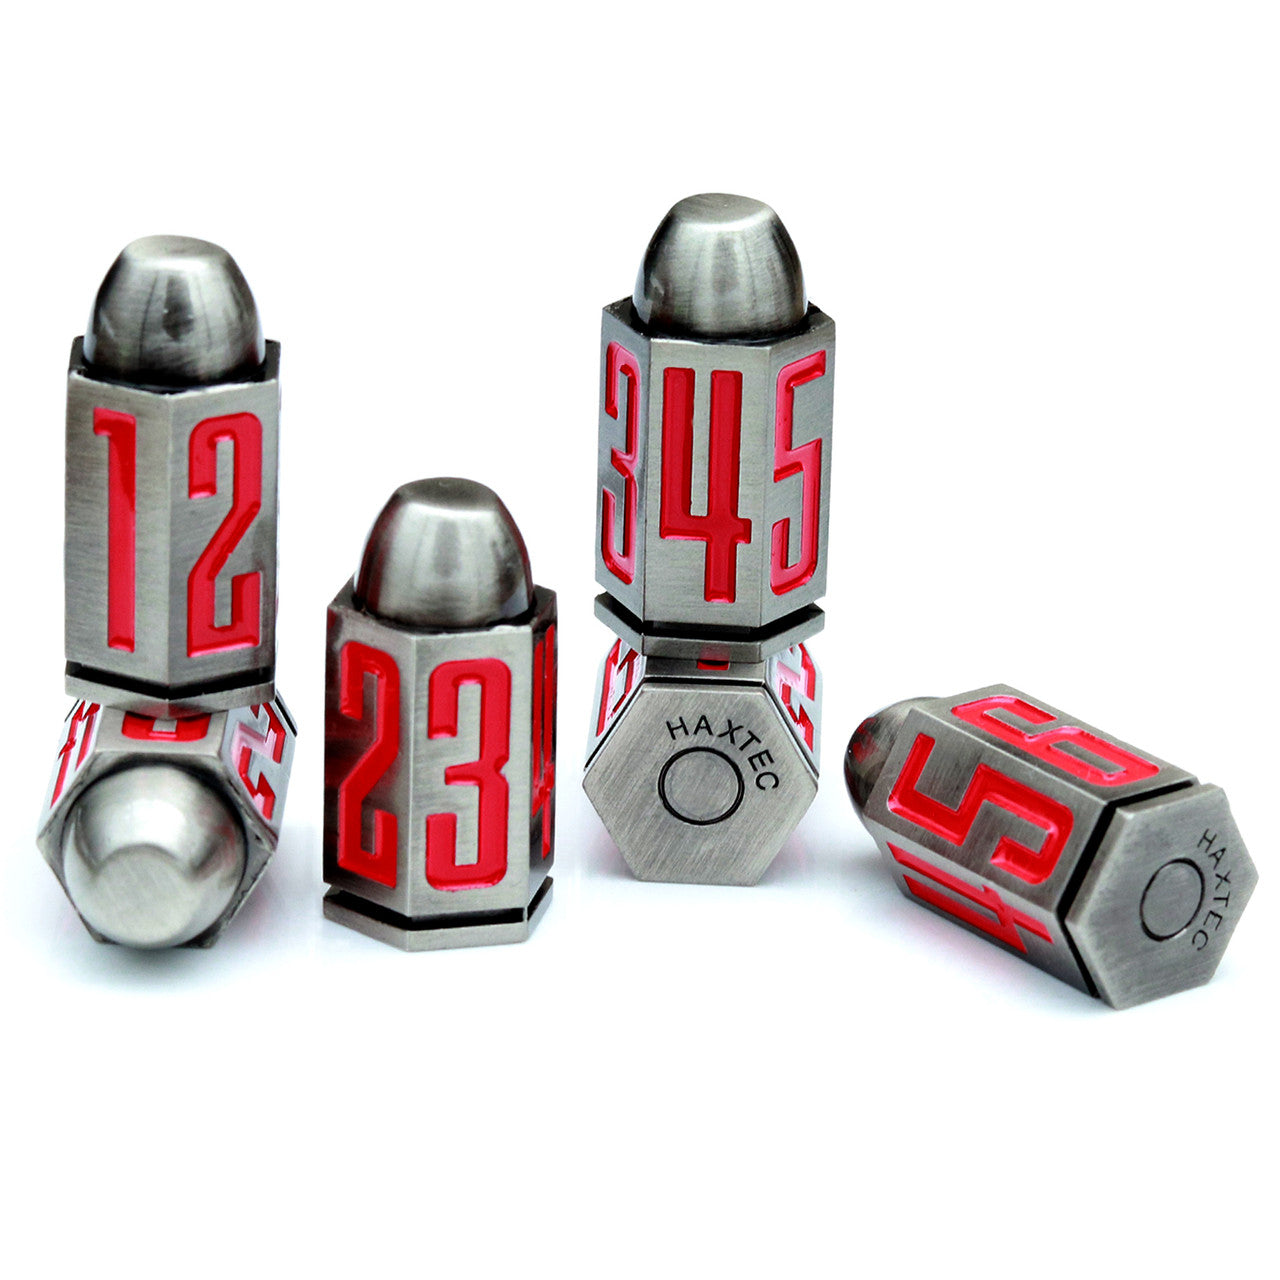 bullet dice metal dice set 6 sided dice by haxtec